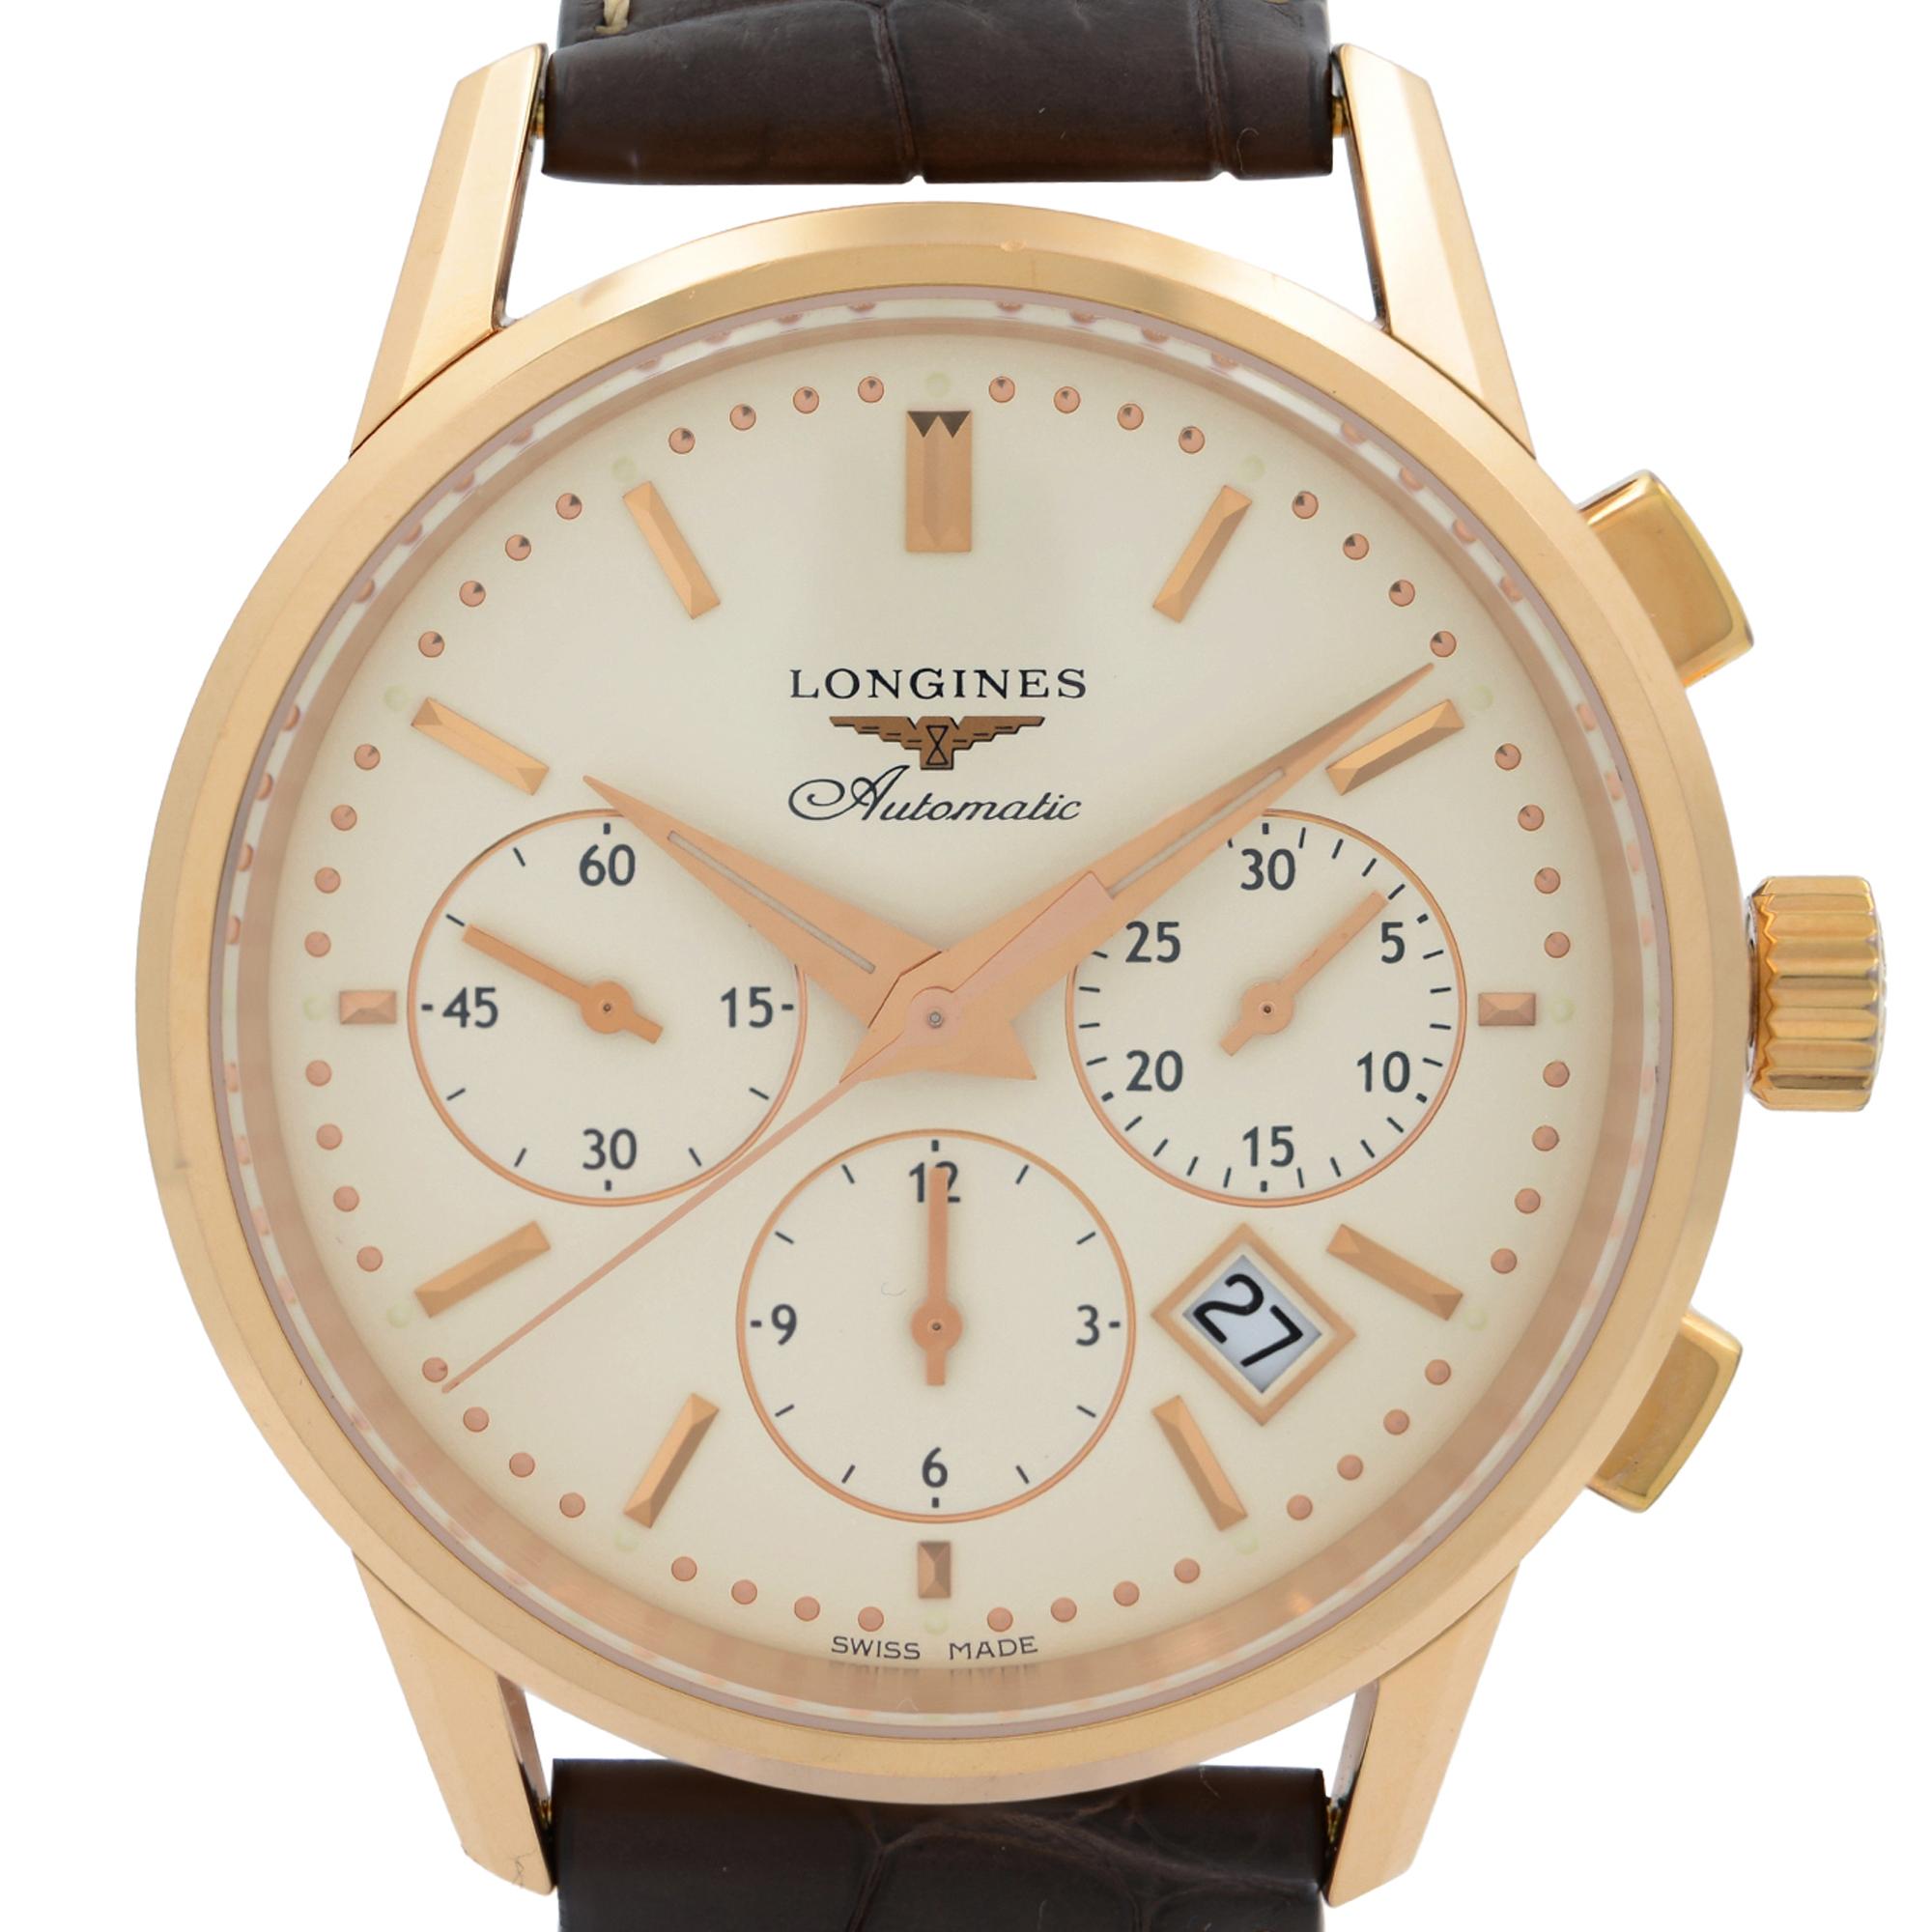 Unworn Longines Heritage Chronograph 18k Rose Gold Cream Dial Mens Watch. This Beautiful Timepiece Features: Solid 18KT Rose Gold Case, Ivor/Off-White Dial with Applied Polished Steel Index Hour Markers. No Original Box and Papers are Included.